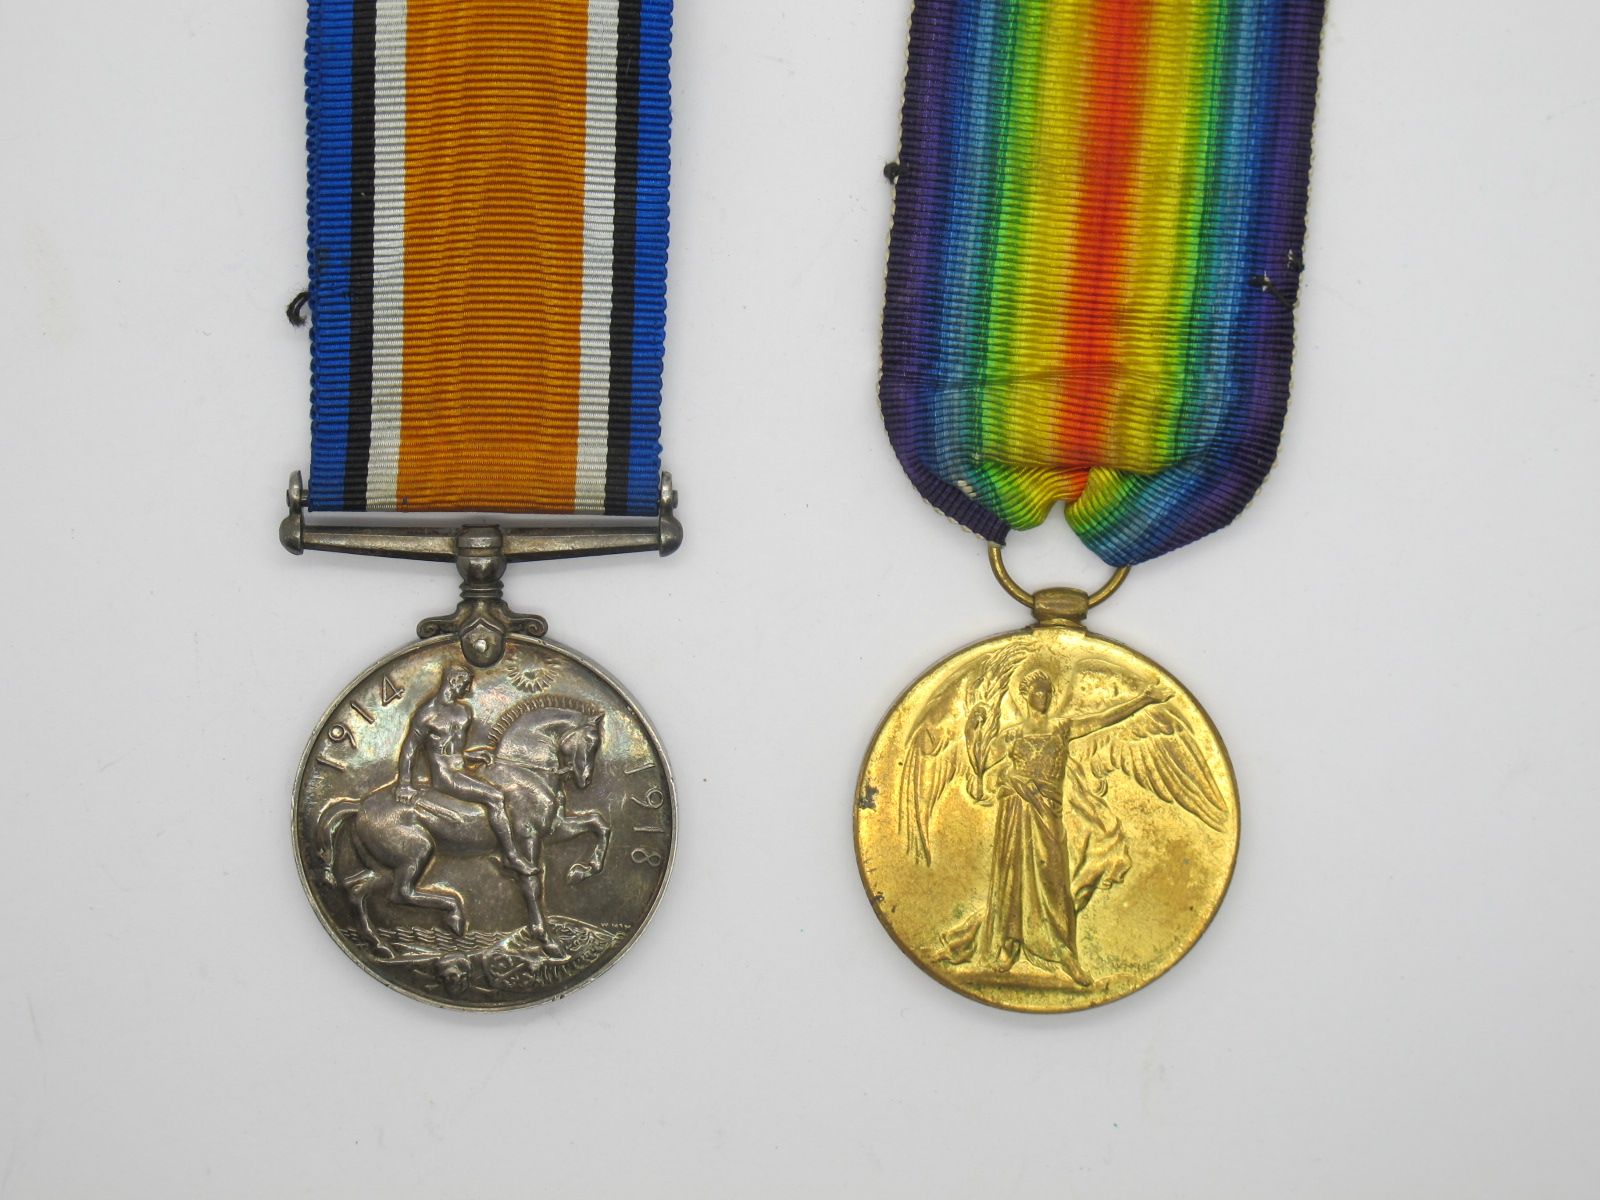 A WWI Pair of Medals, consisting of War and Victory Medals to 291858 Private H. Woodbridge Middlesex